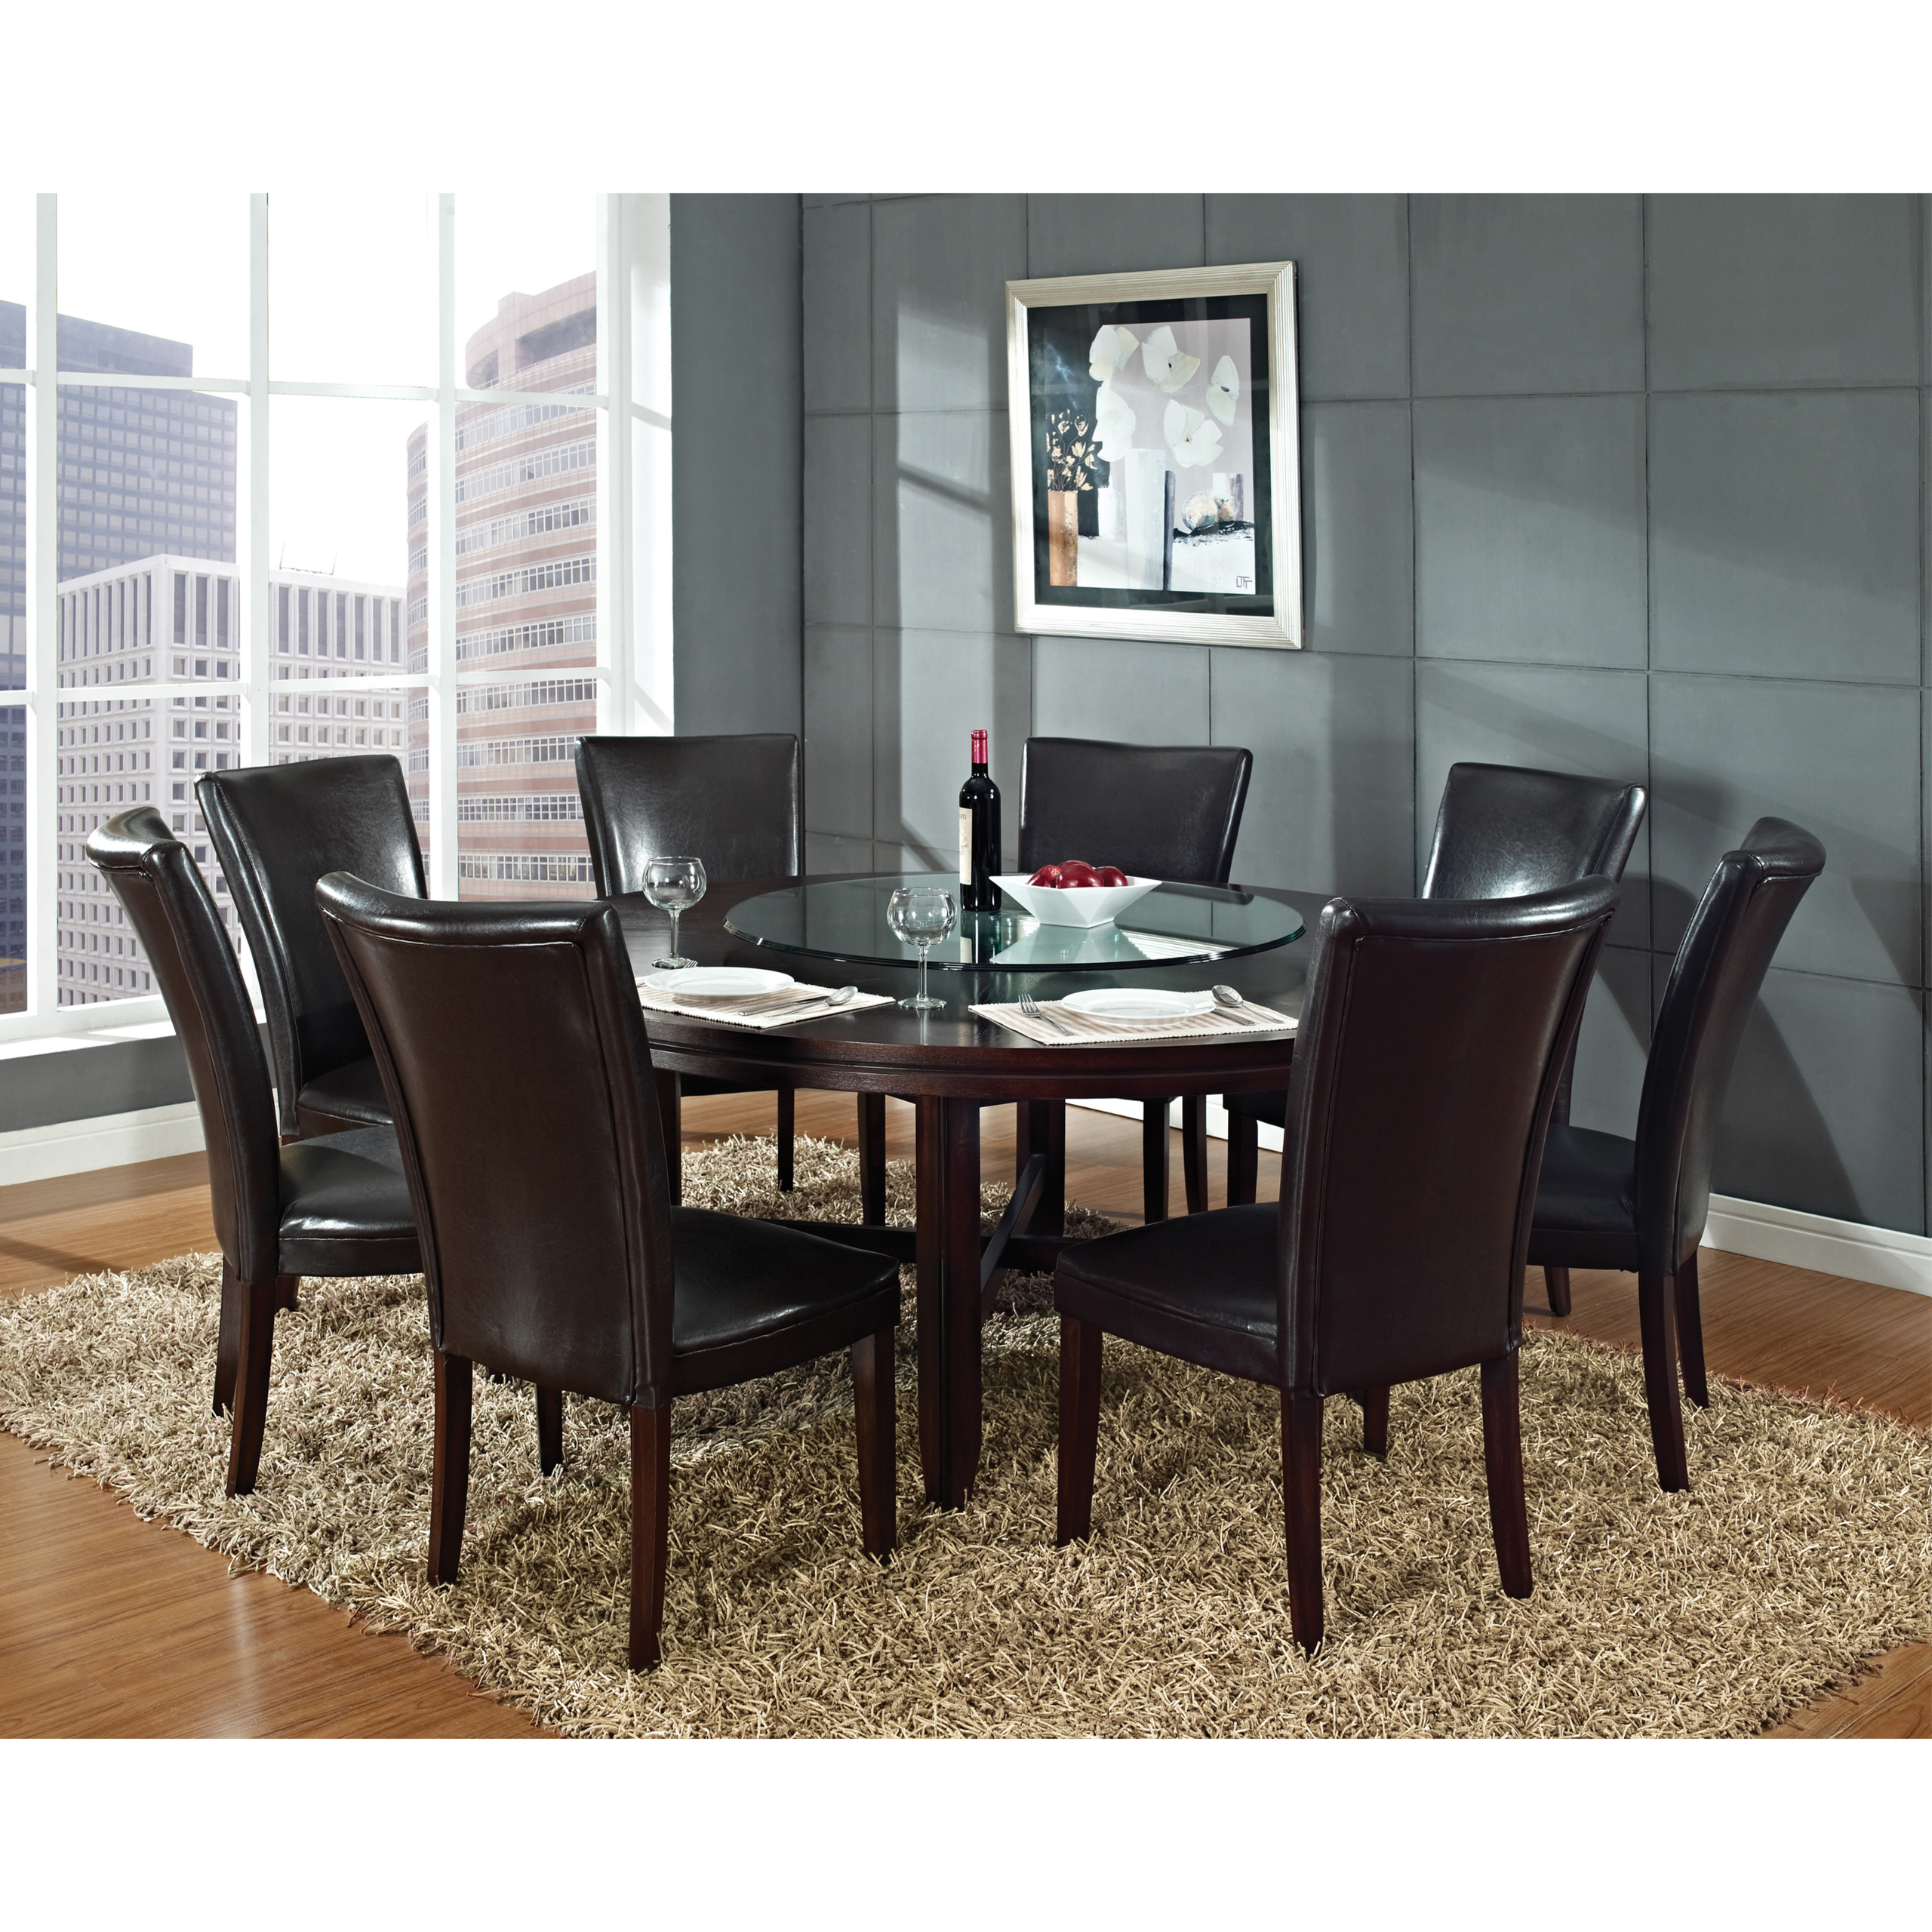 Round Dining Table For 6 Visualhunt, Round Dining Table Sets Clearance